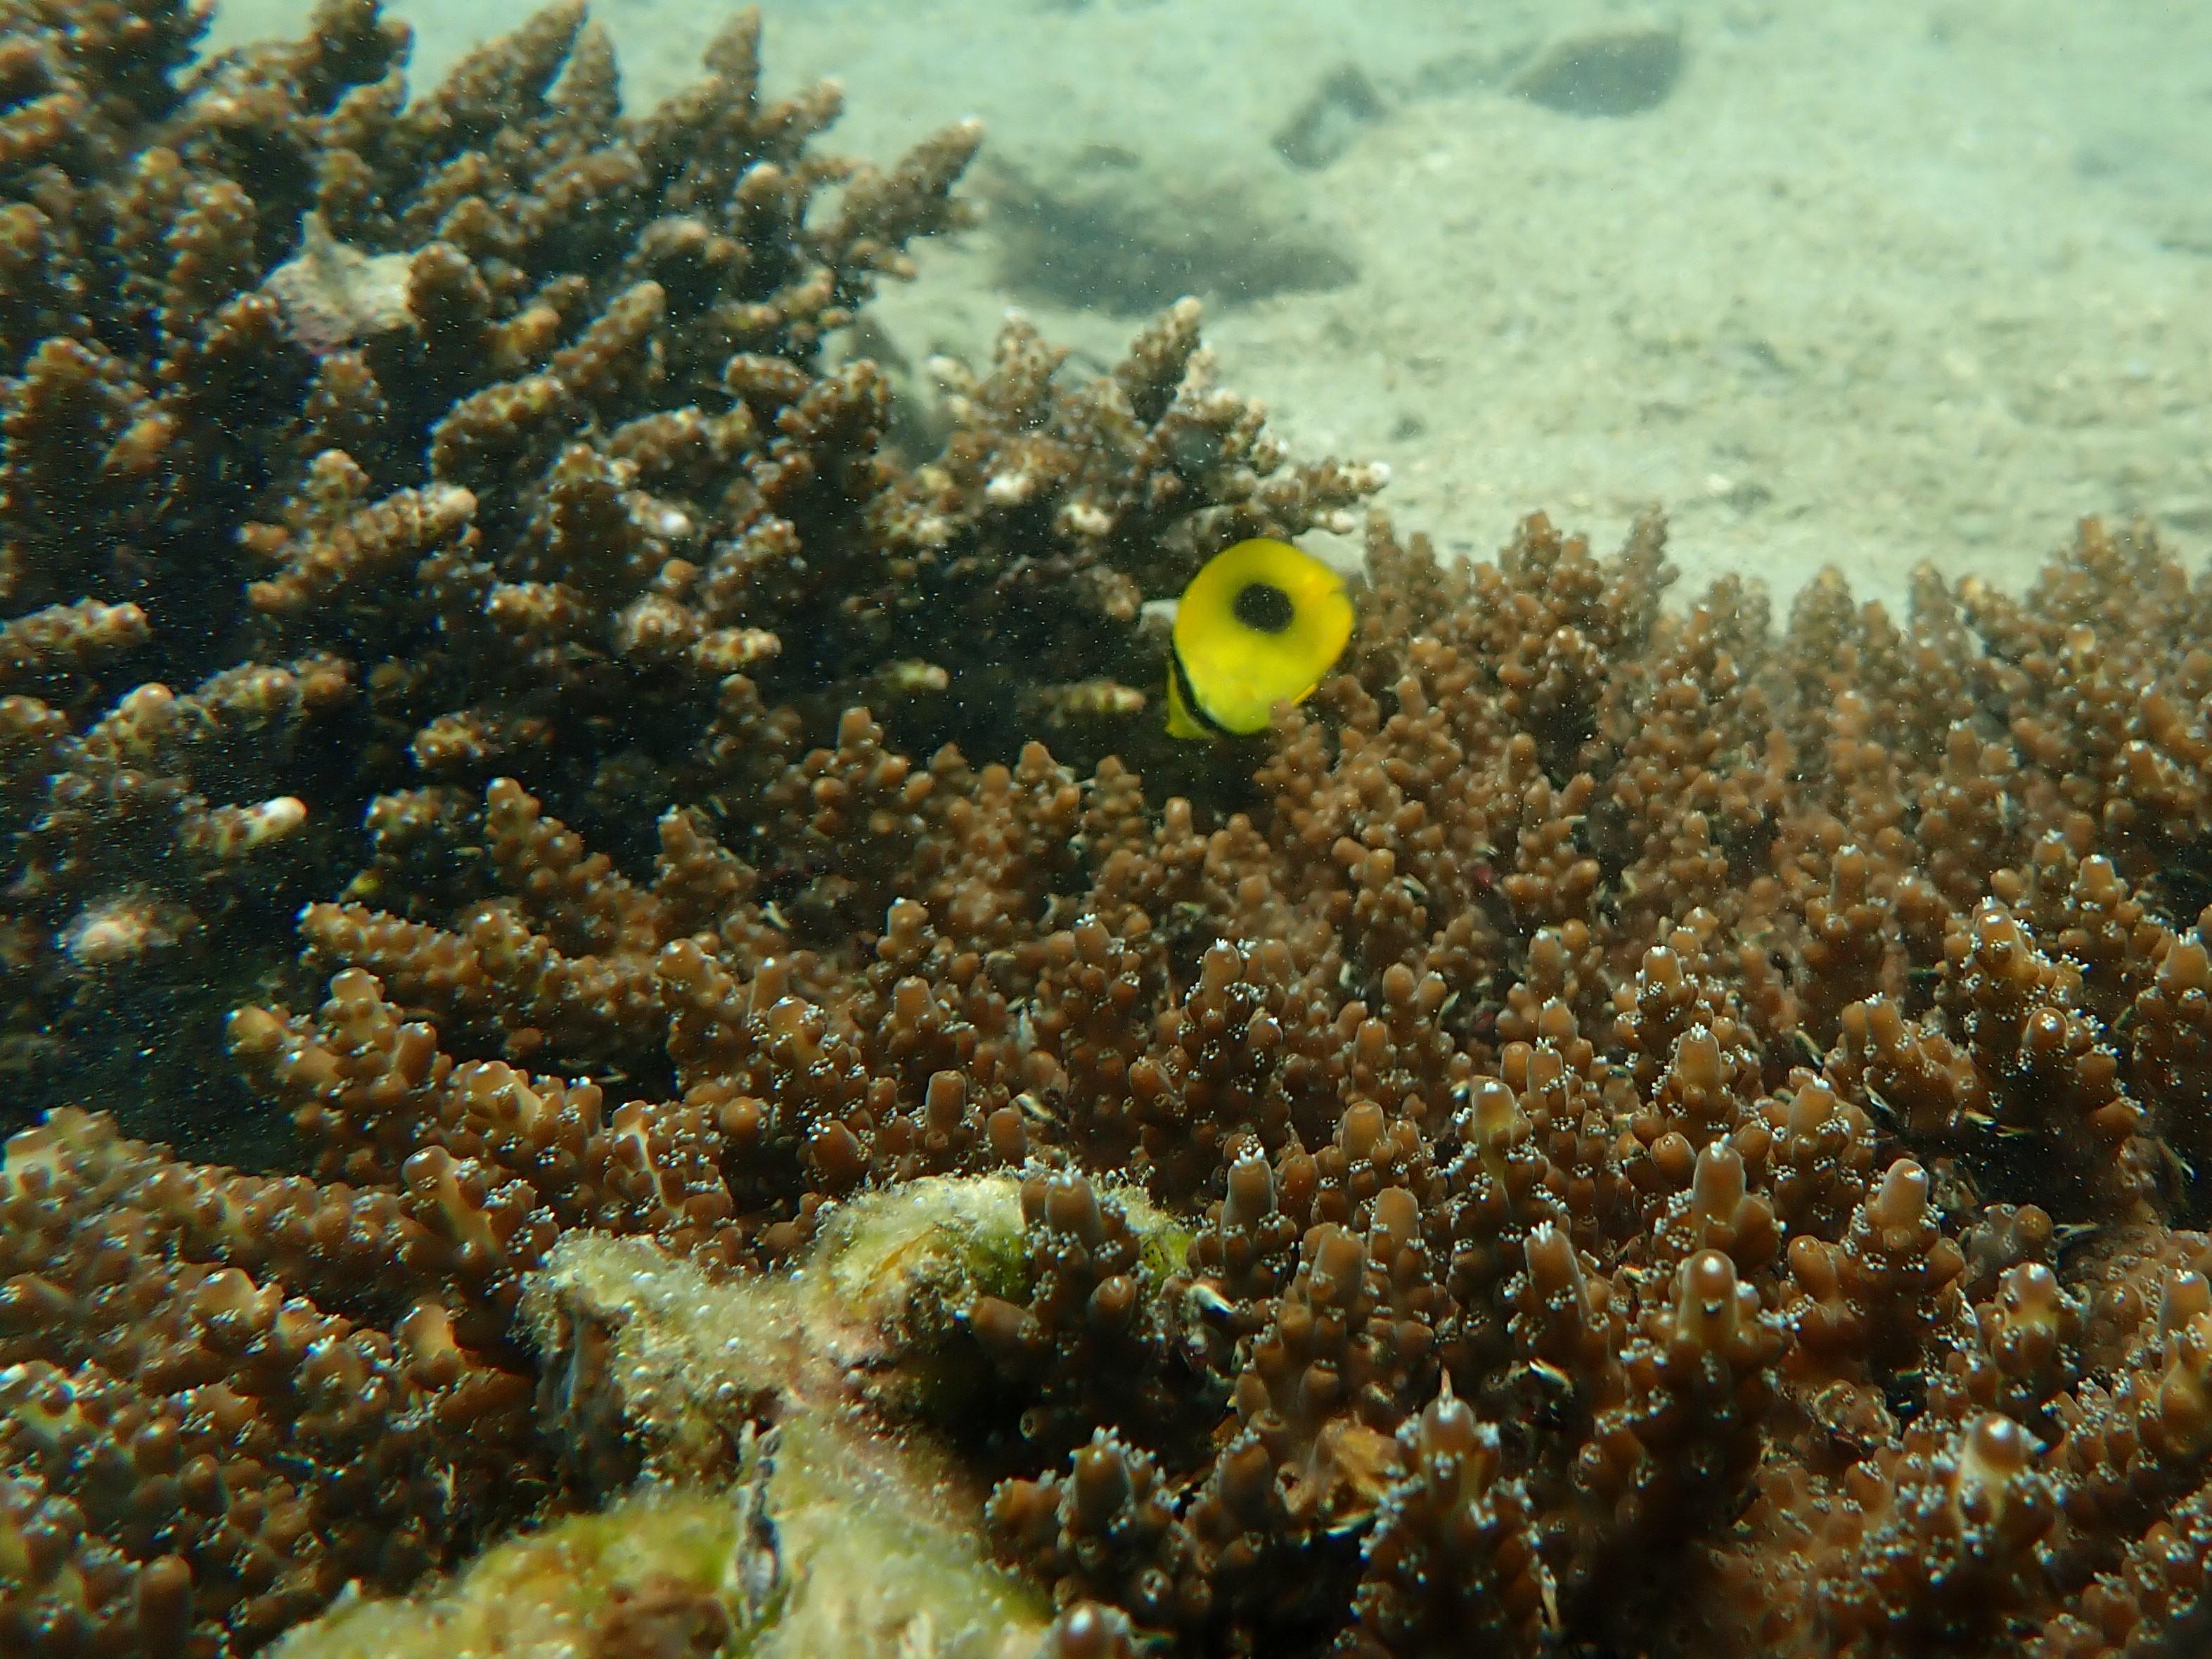 The Agriculture, Fisheries and Conservation Department announced today (December 10) that the results of the Hong Kong Reef Check this year showed that local corals are generally in a healthy condition and that the species diversity remains on the high side. Photo shows a butterfly fish and Staghorn corals at Hoi Ha Wan.